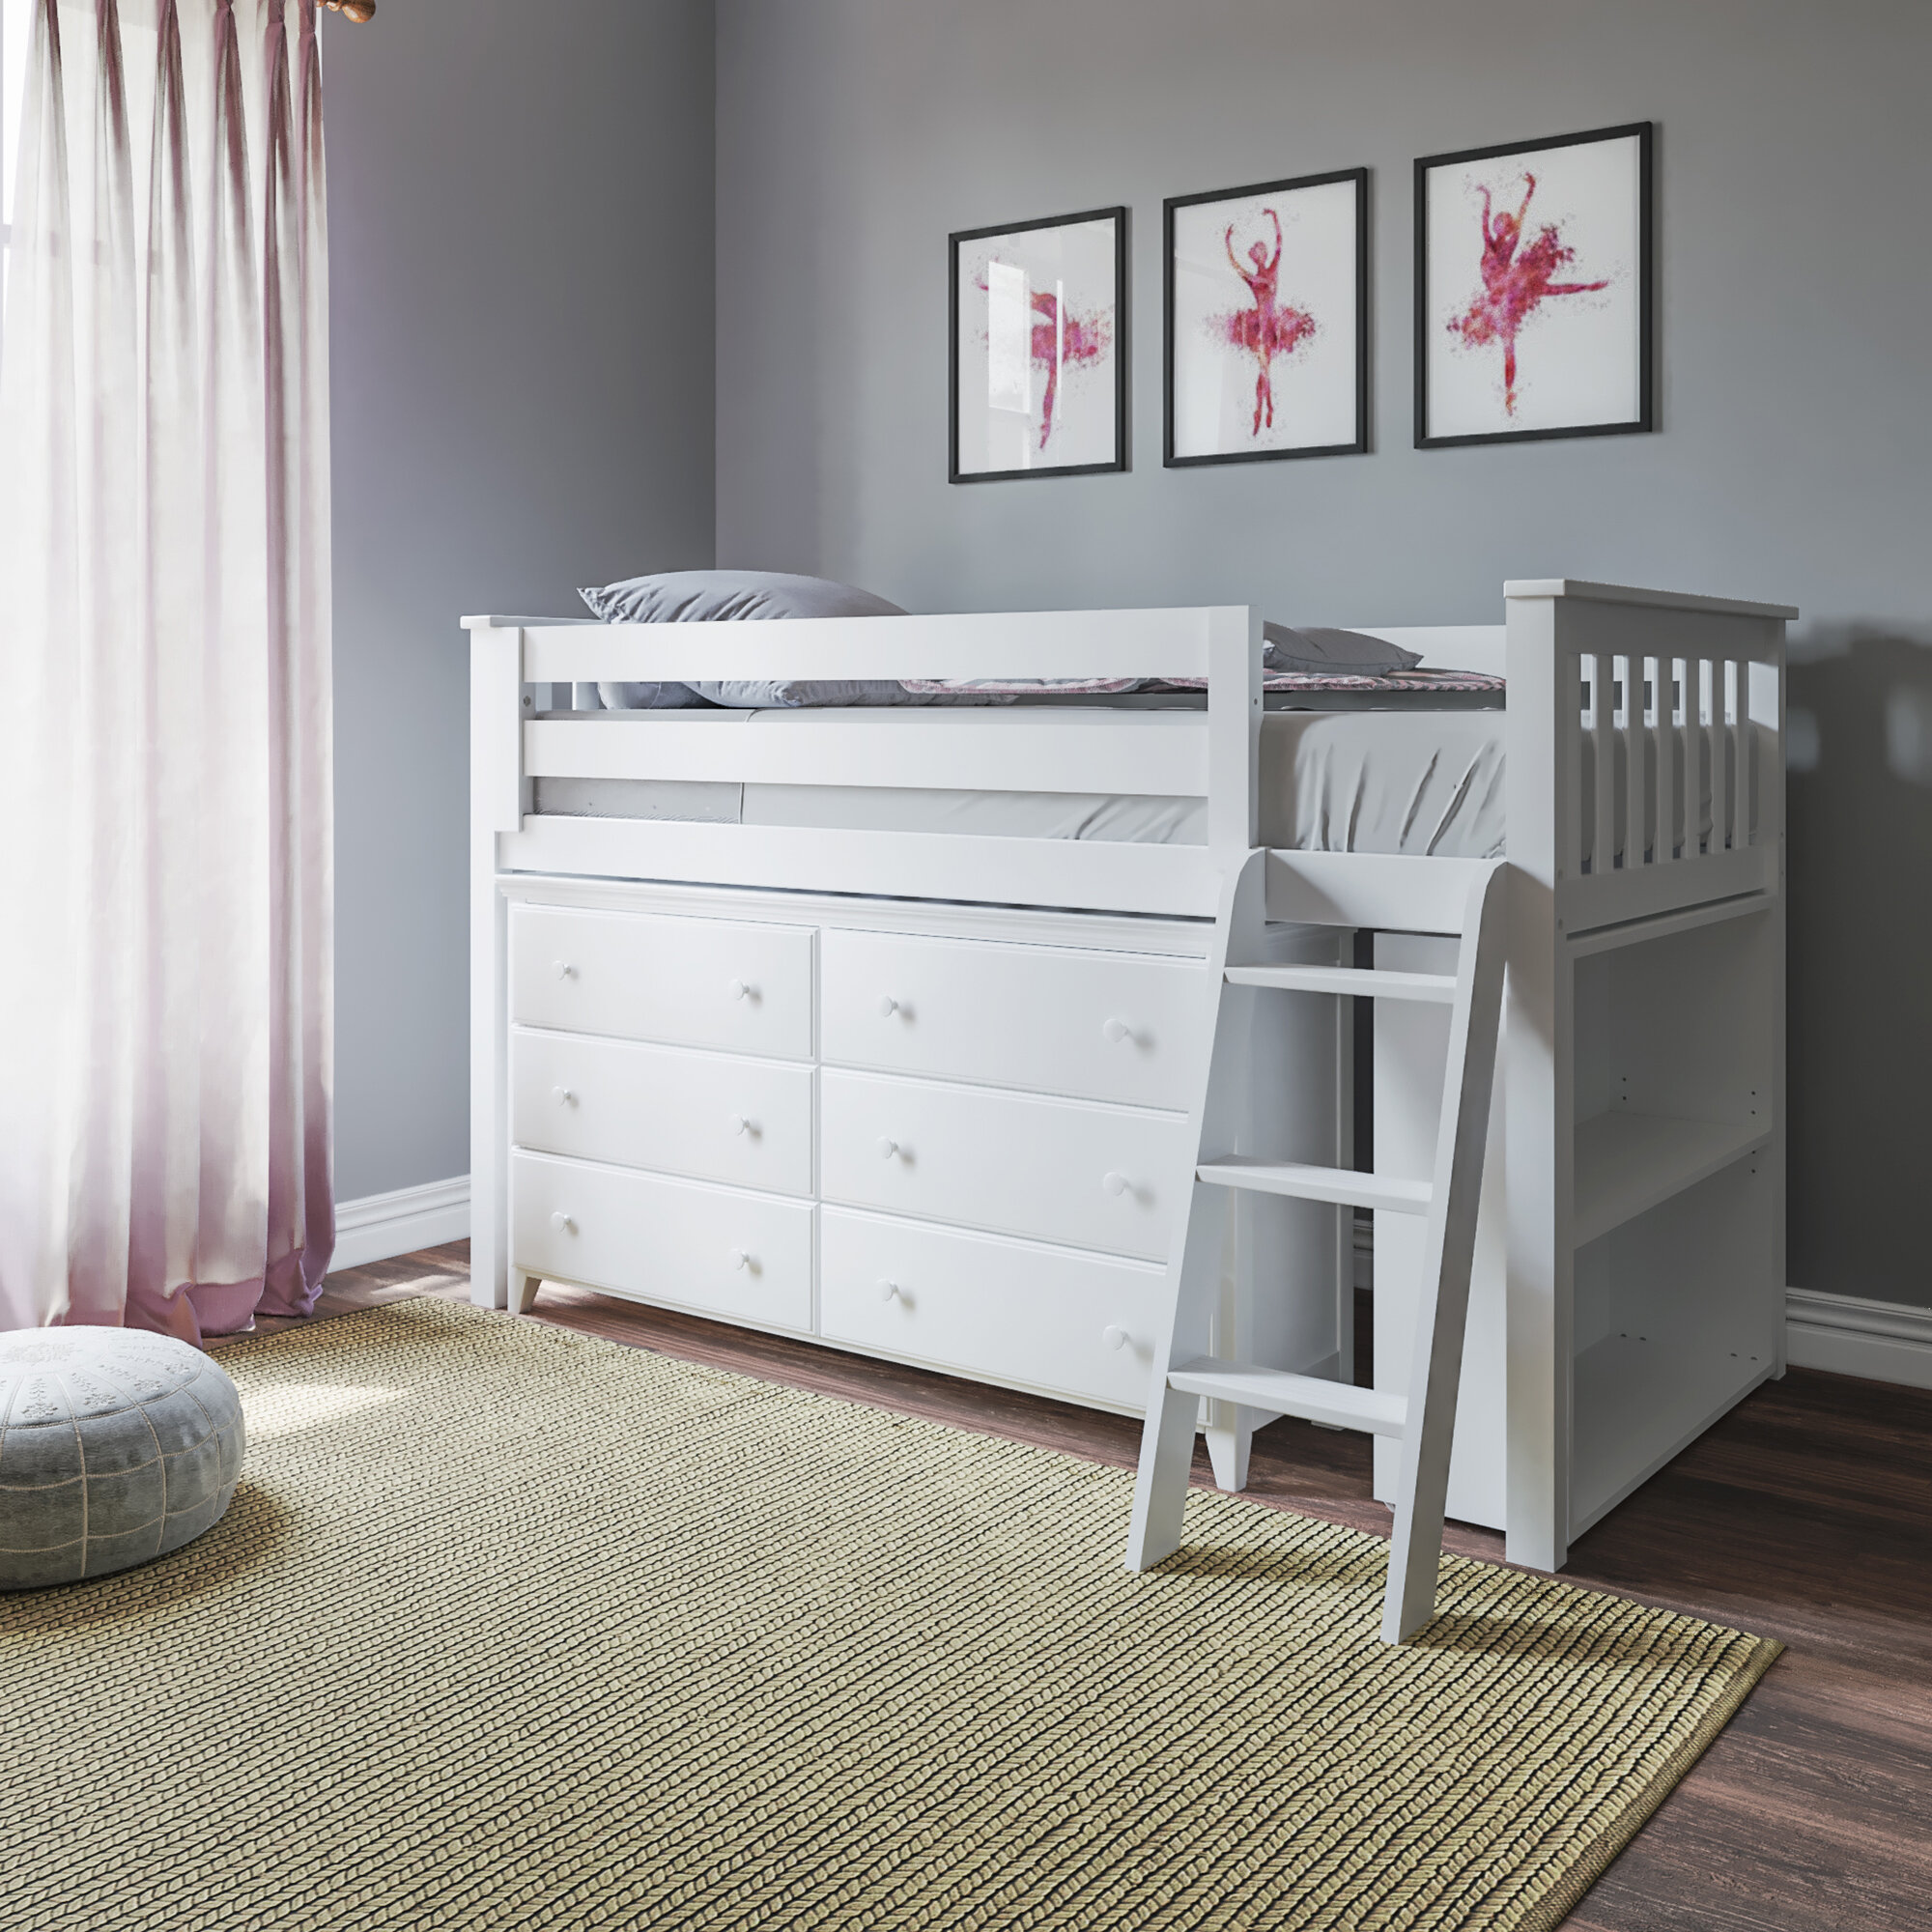 Harriet Bee Ginny Twin Bunk And Loft Configurations Bed With